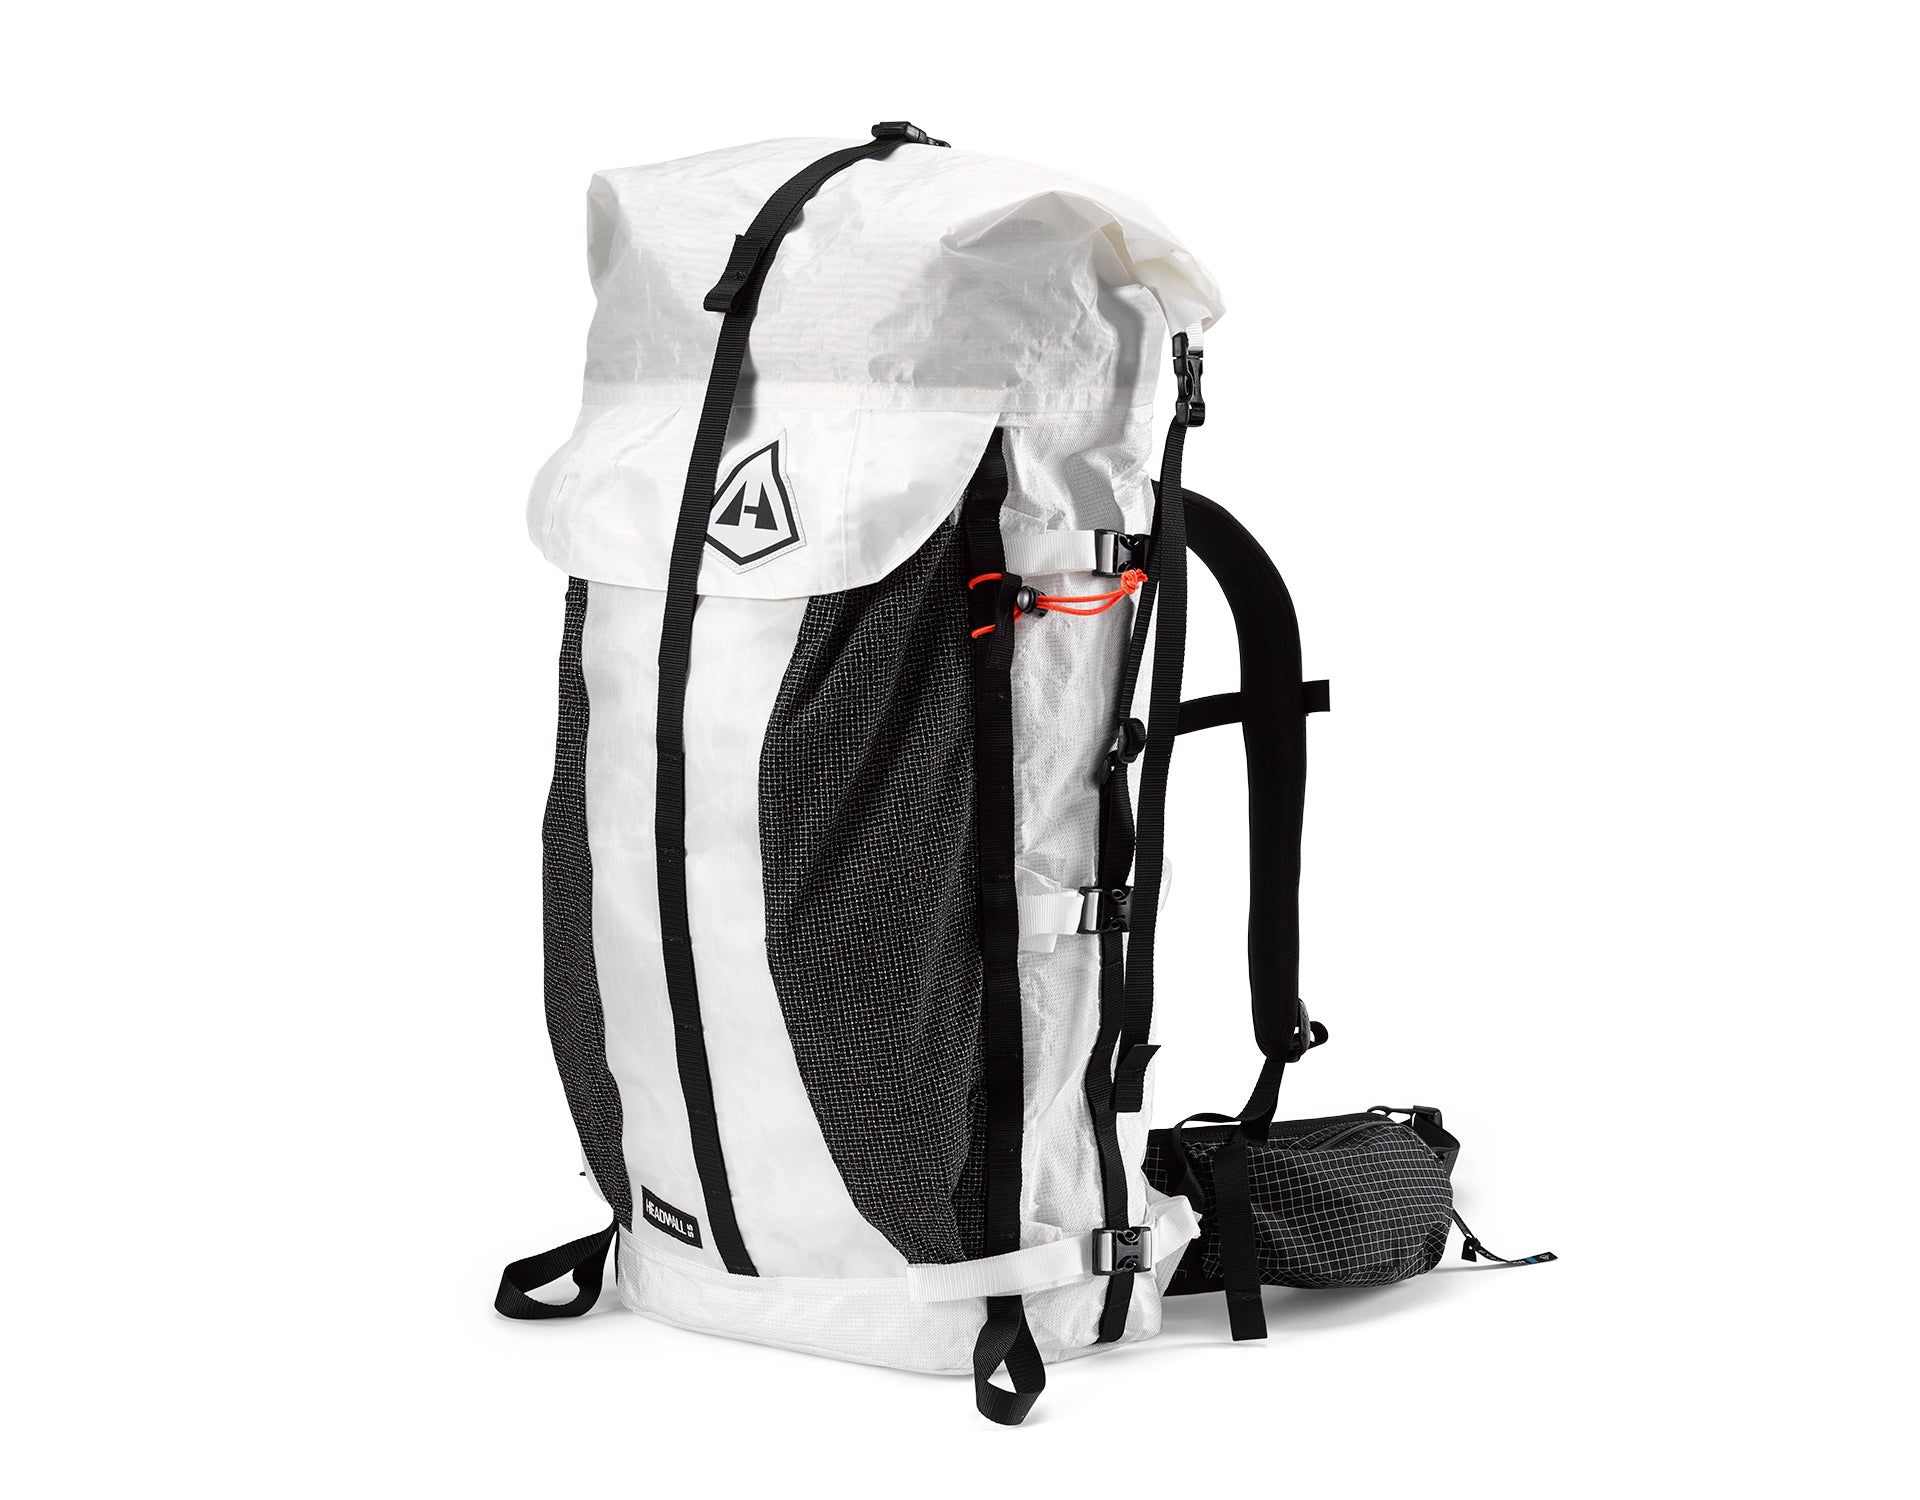 A white and black backpack.